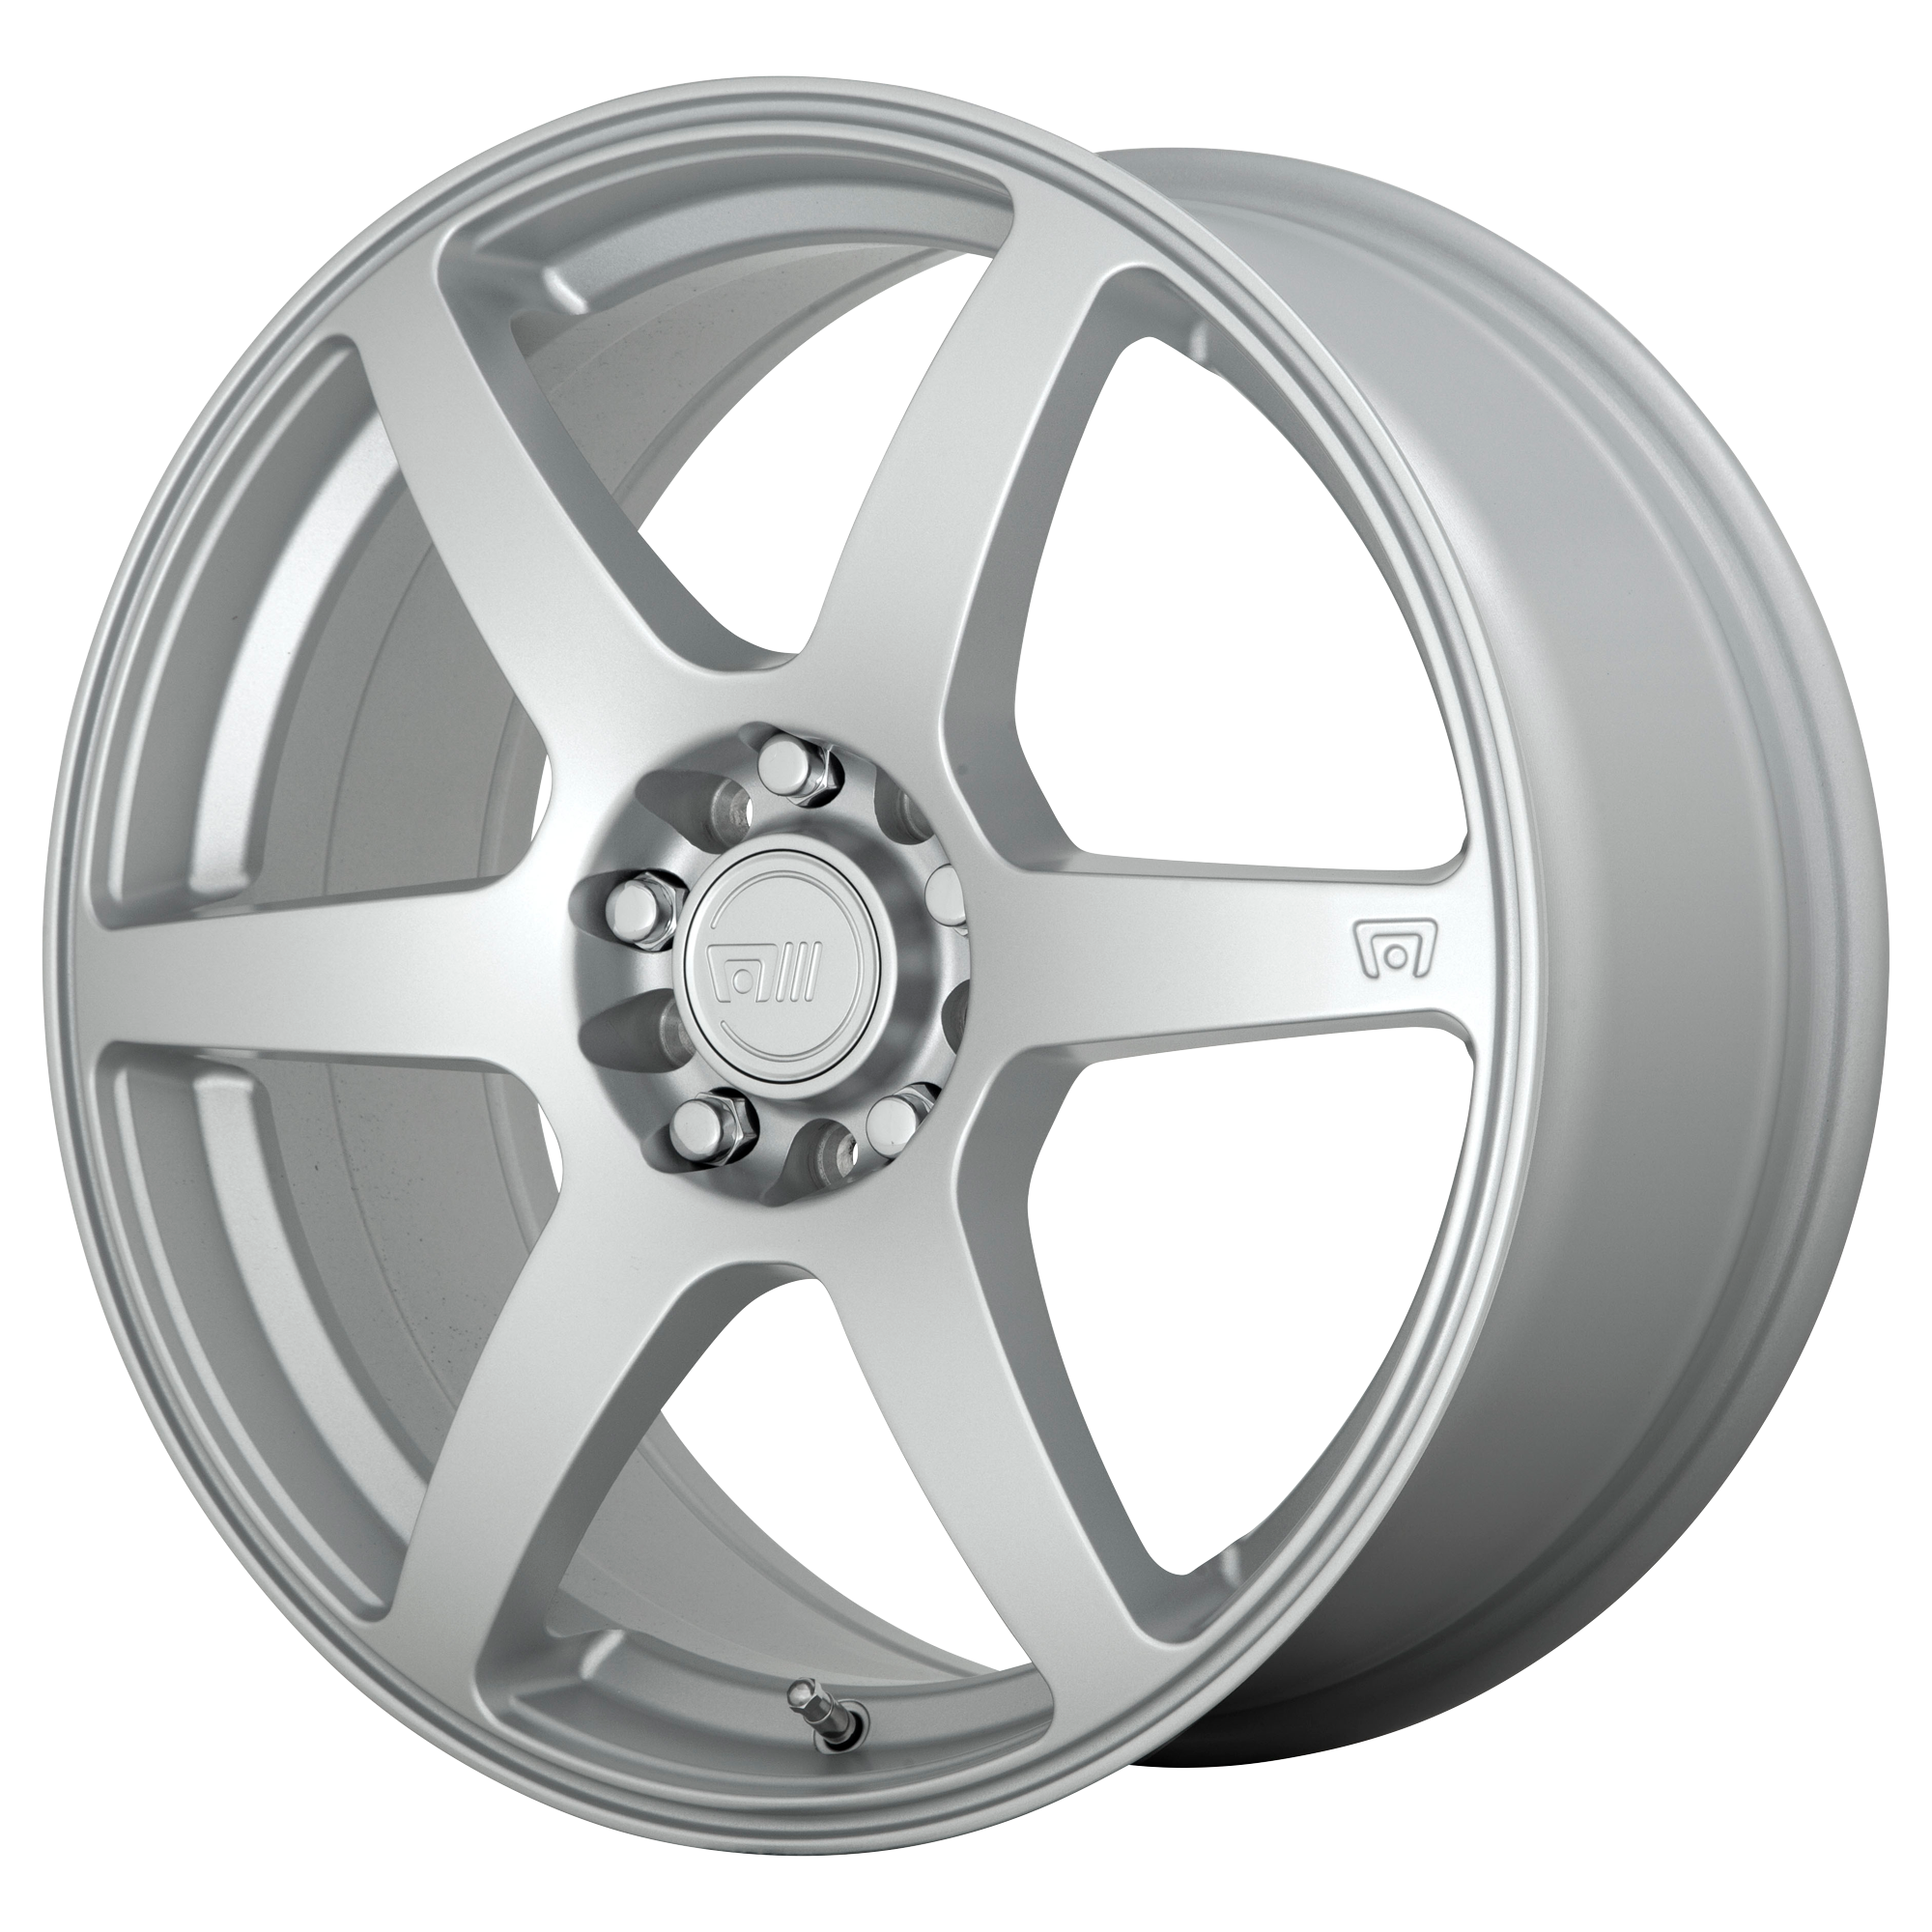 CS6 16x7 5x110.00/5x115.00 HYPER SILVER (40 mm) - Tires and Engine Performance